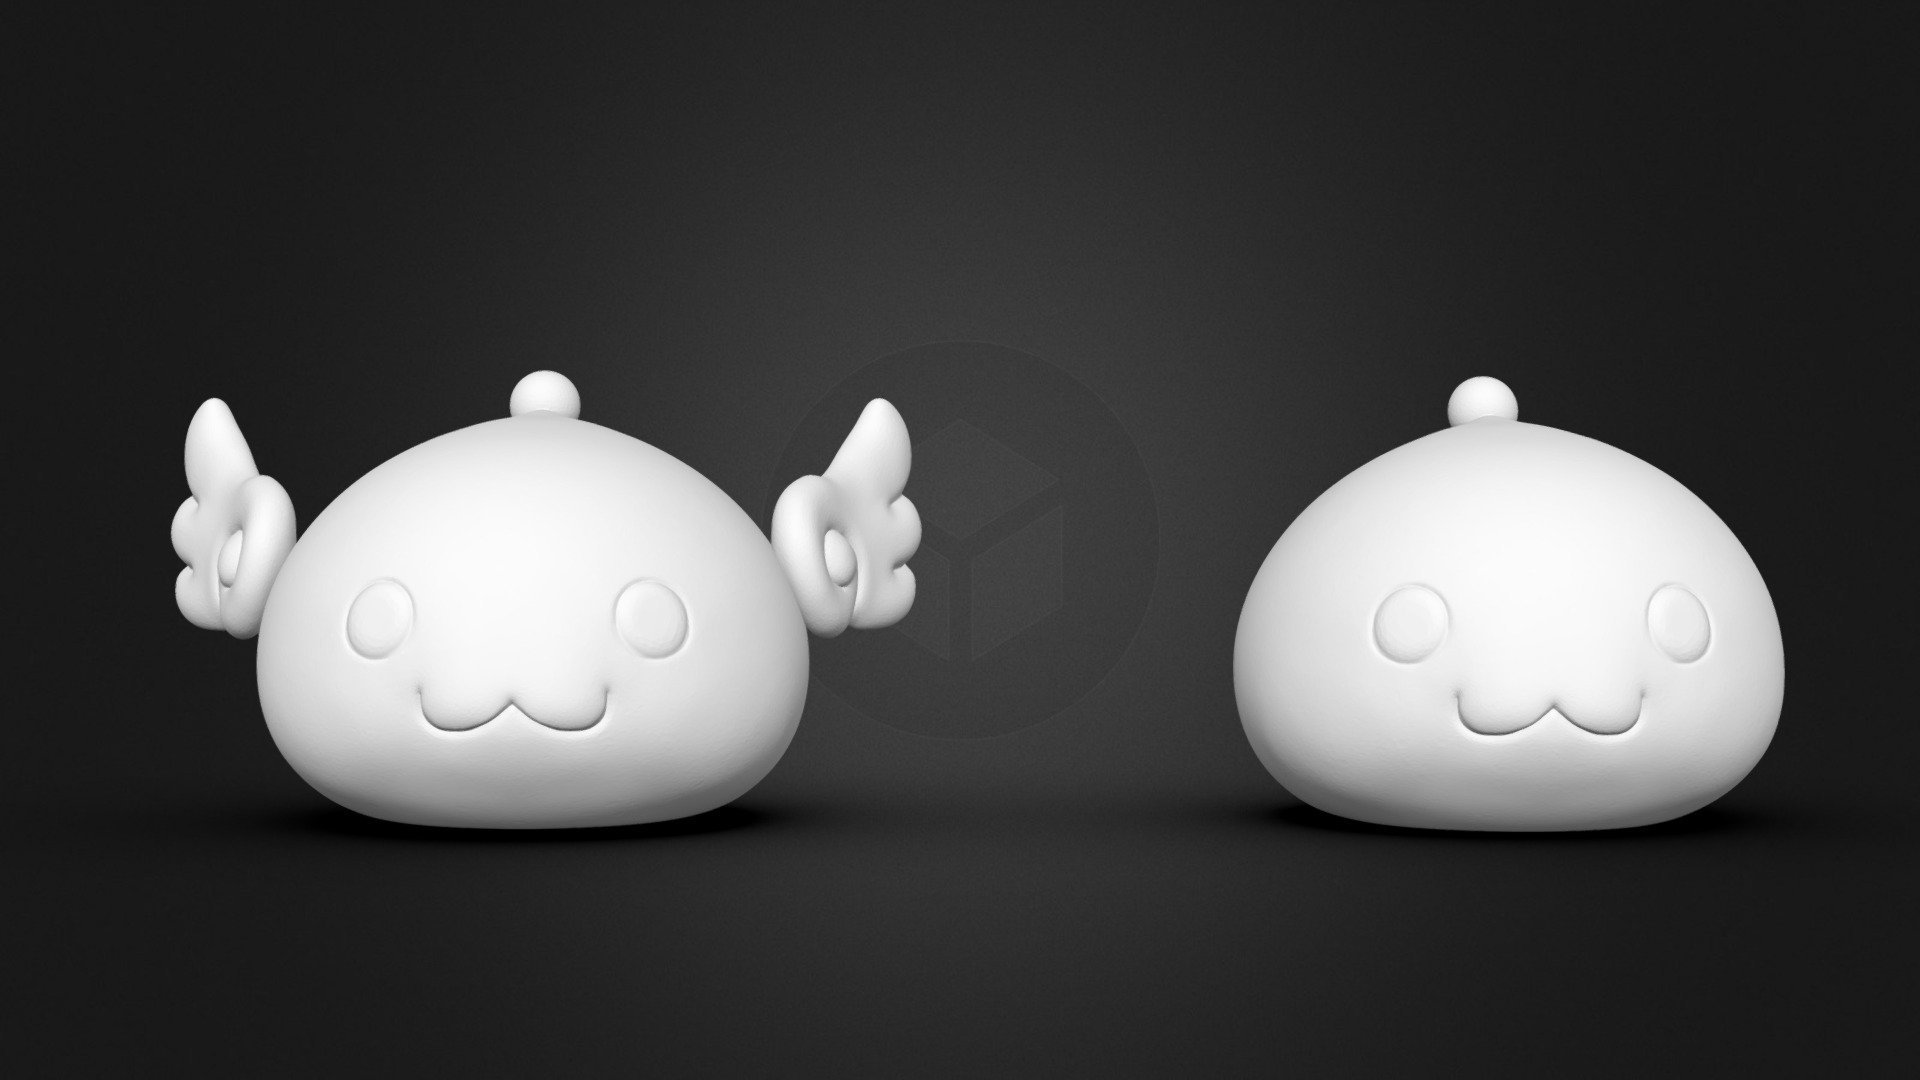 Angeling and Poring from Ragnarok Online

File is STL and Hollowed (for save resin and filament)

Size :

X : Face length : poring 49 mm, Angeling 69 mm

Z : Depth Length : 49 mm

Y : Height : 40 mm

Model is STL file format and Ready to 3D Printing (None Errors )

Model no UV, Texture, and coloring not include

Enjoy ^^ - Angeling and Poring Fan ART STL for 3DPrint - Buy Royalty Free 3D model by SeberdrA 3d model